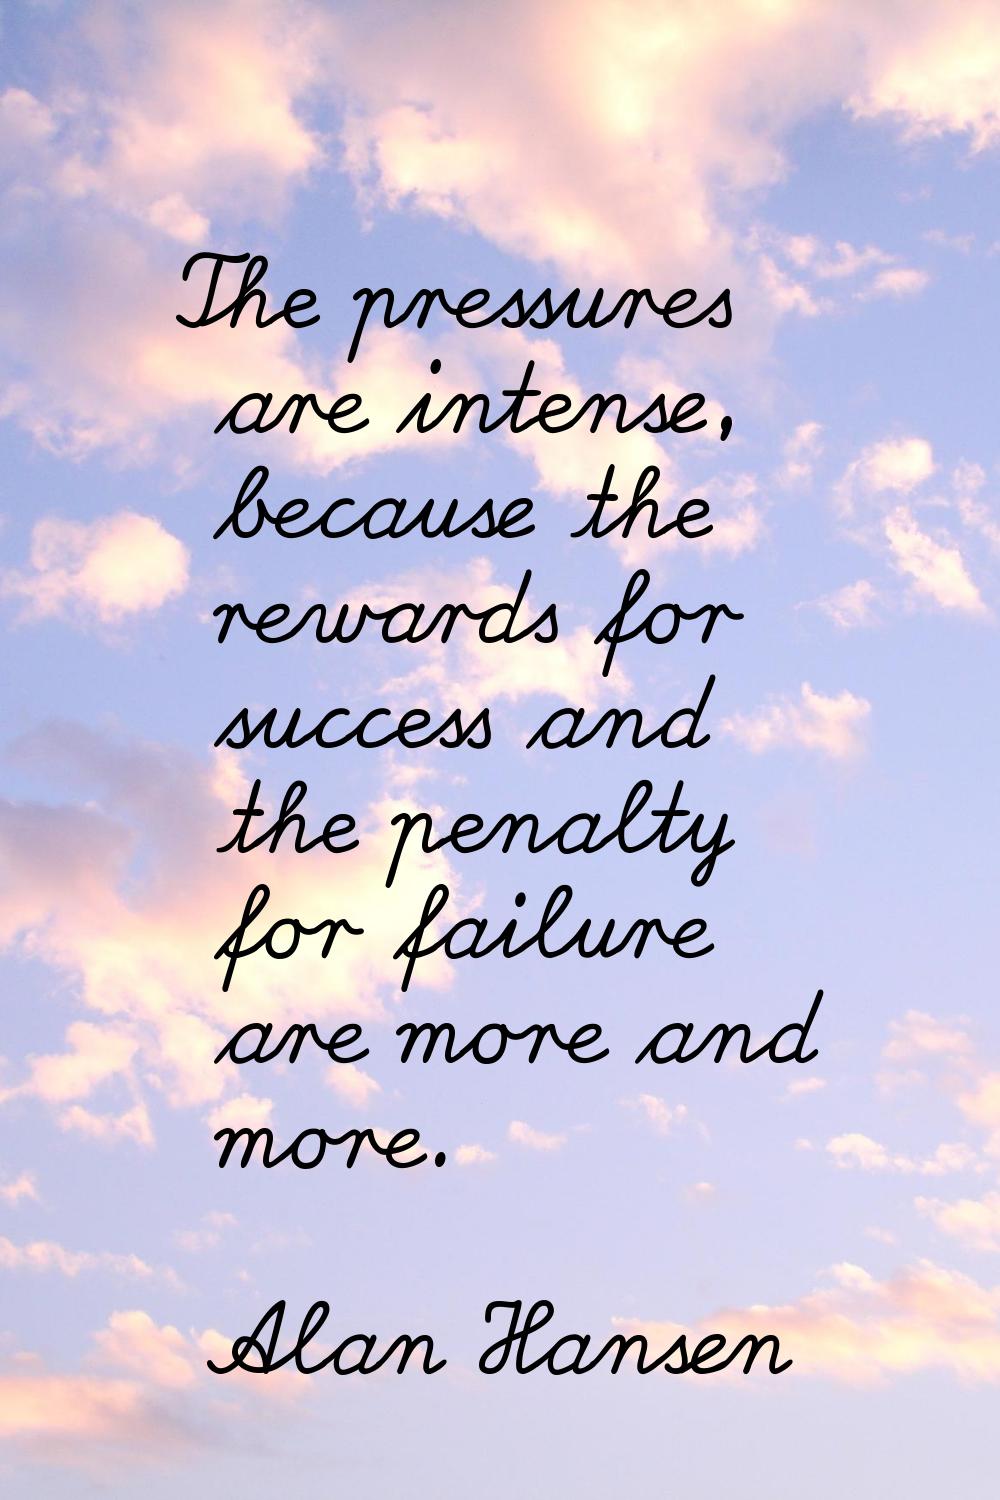 The pressures are intense, because the rewards for success and the penalty for failure are more and